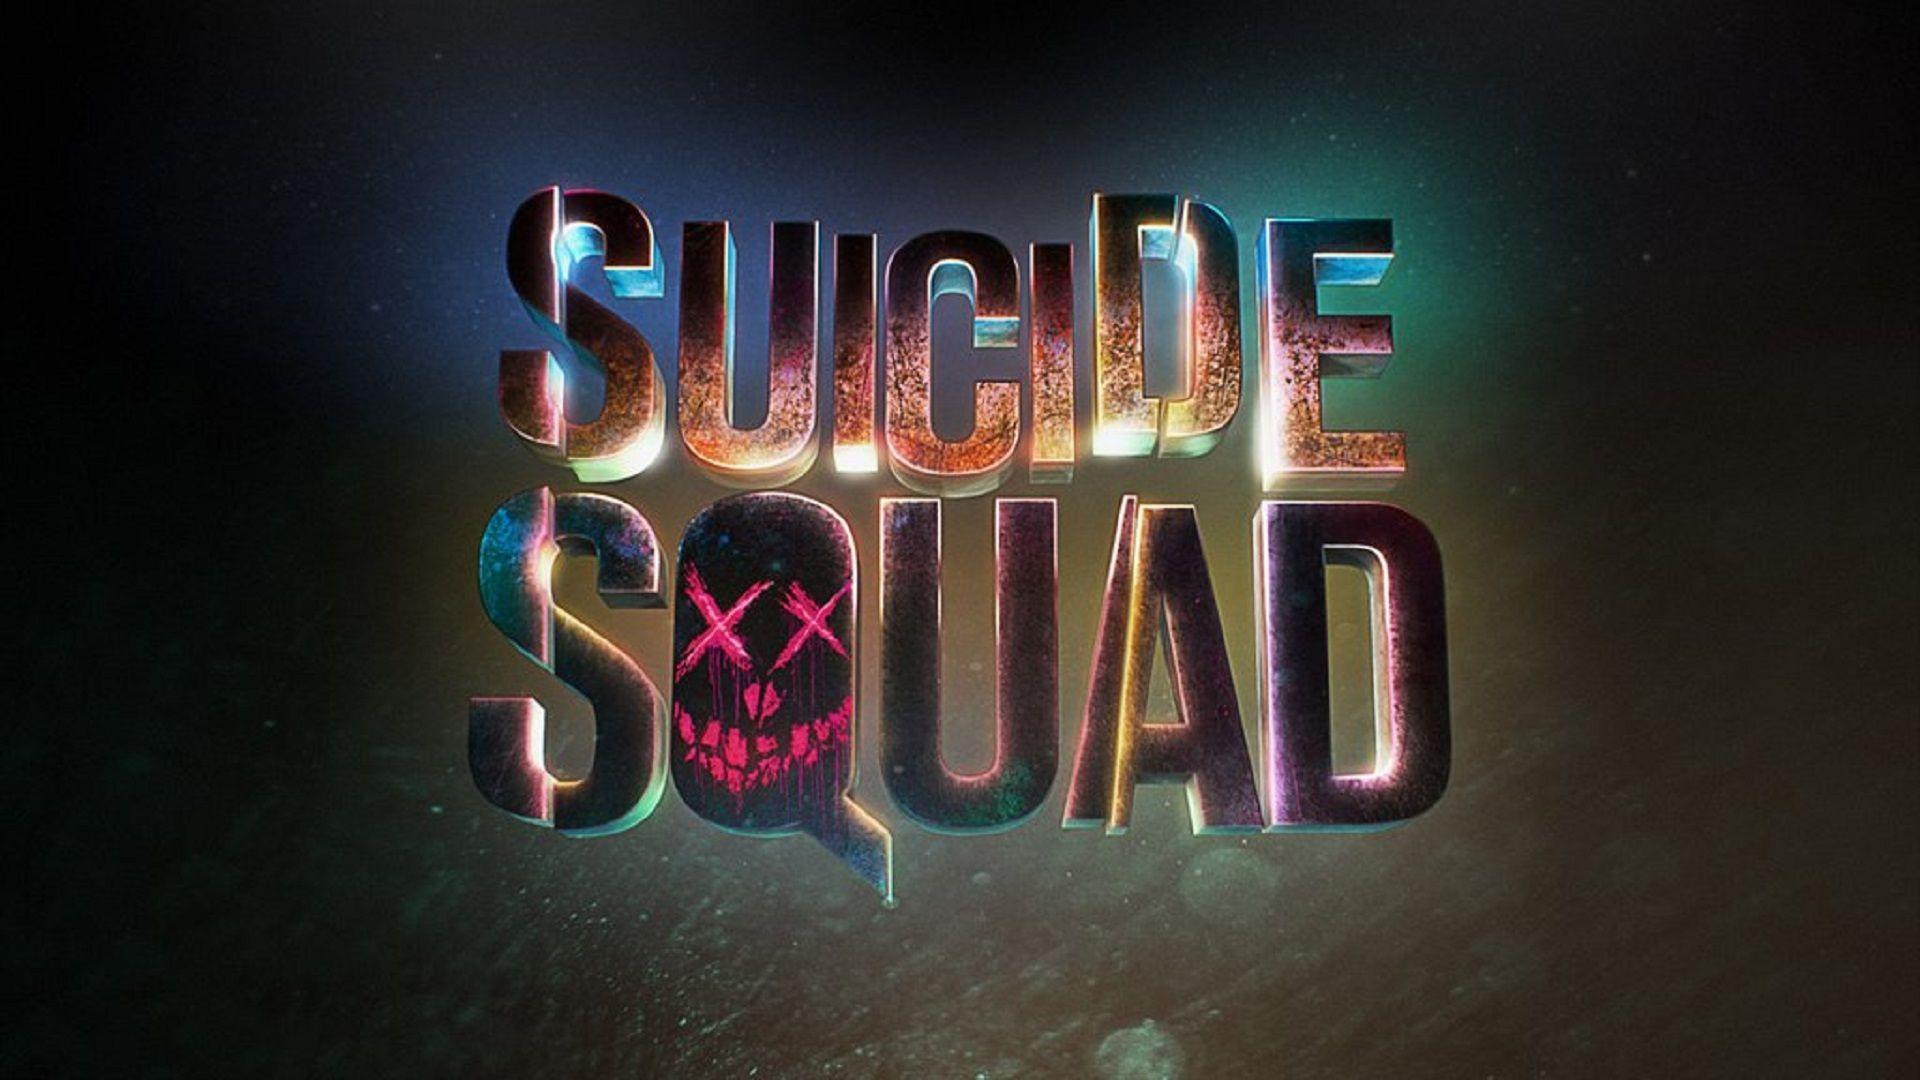 Astonishing Suicide Squad Wallpaper HD Download